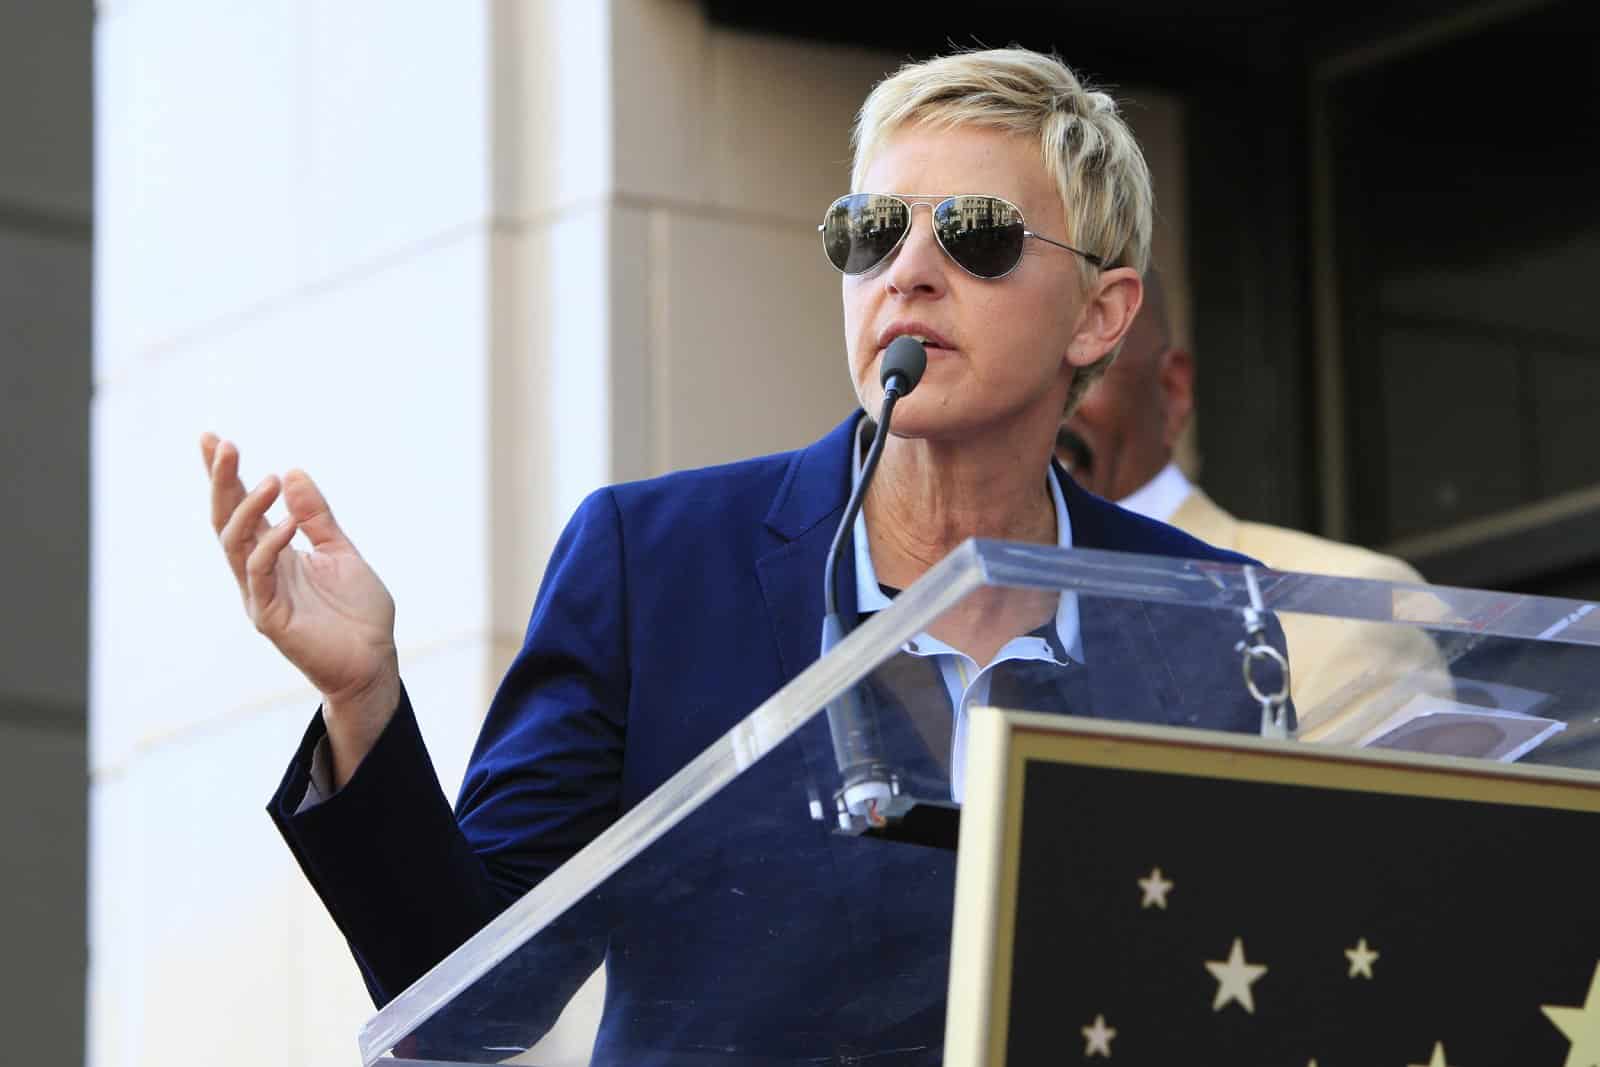 Image Credit: Shutterstock / Joe Seer <p><span>By coming out publicly on her TV show in 1997, DeGeneres broke new ground for LGBTQ+ representation in mainstream media. She continues to be a powerful advocate for LGBTQ+ rights.</span></p>